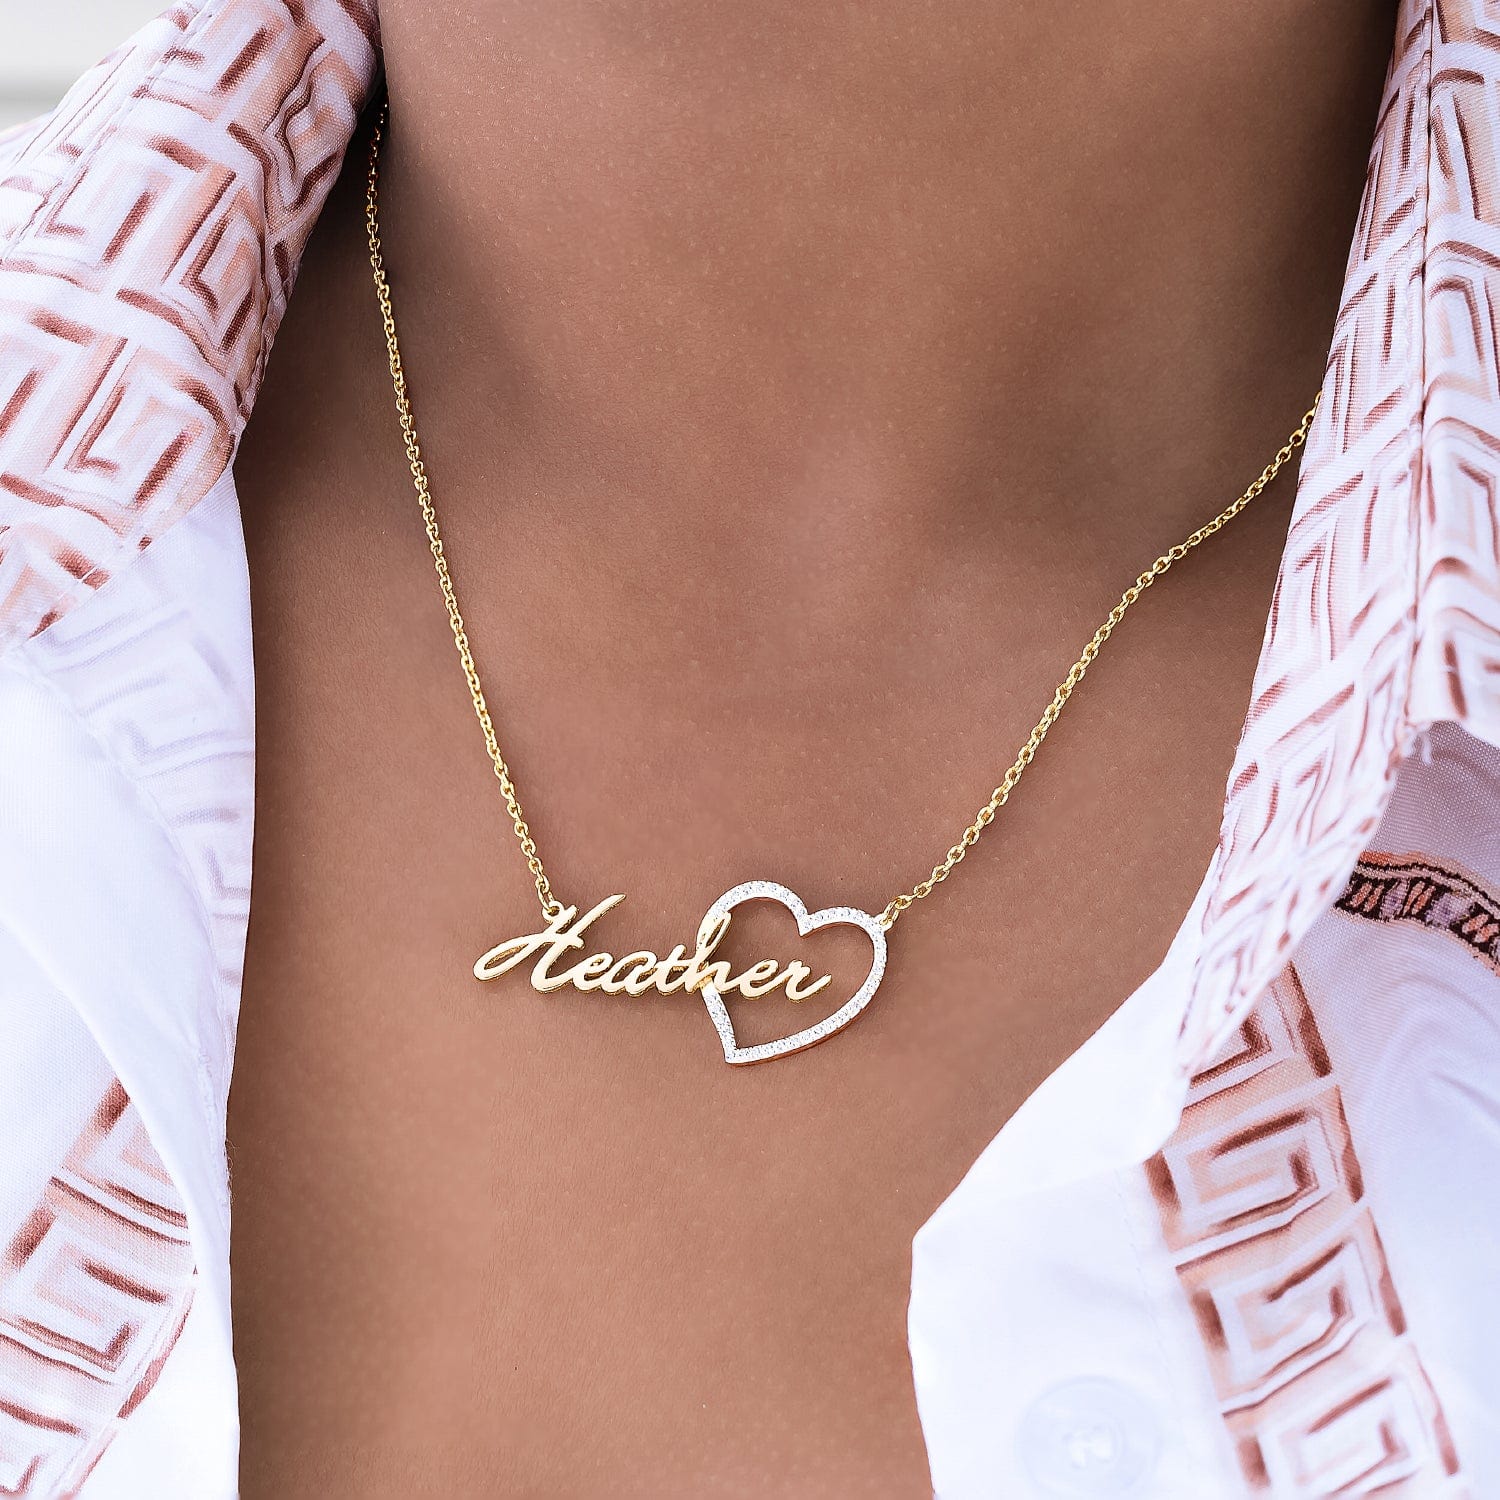 14k Gold over Sterling Silver / Cuban Chain Single Plated Nameplate Necklace "Heather" with Stones Heart